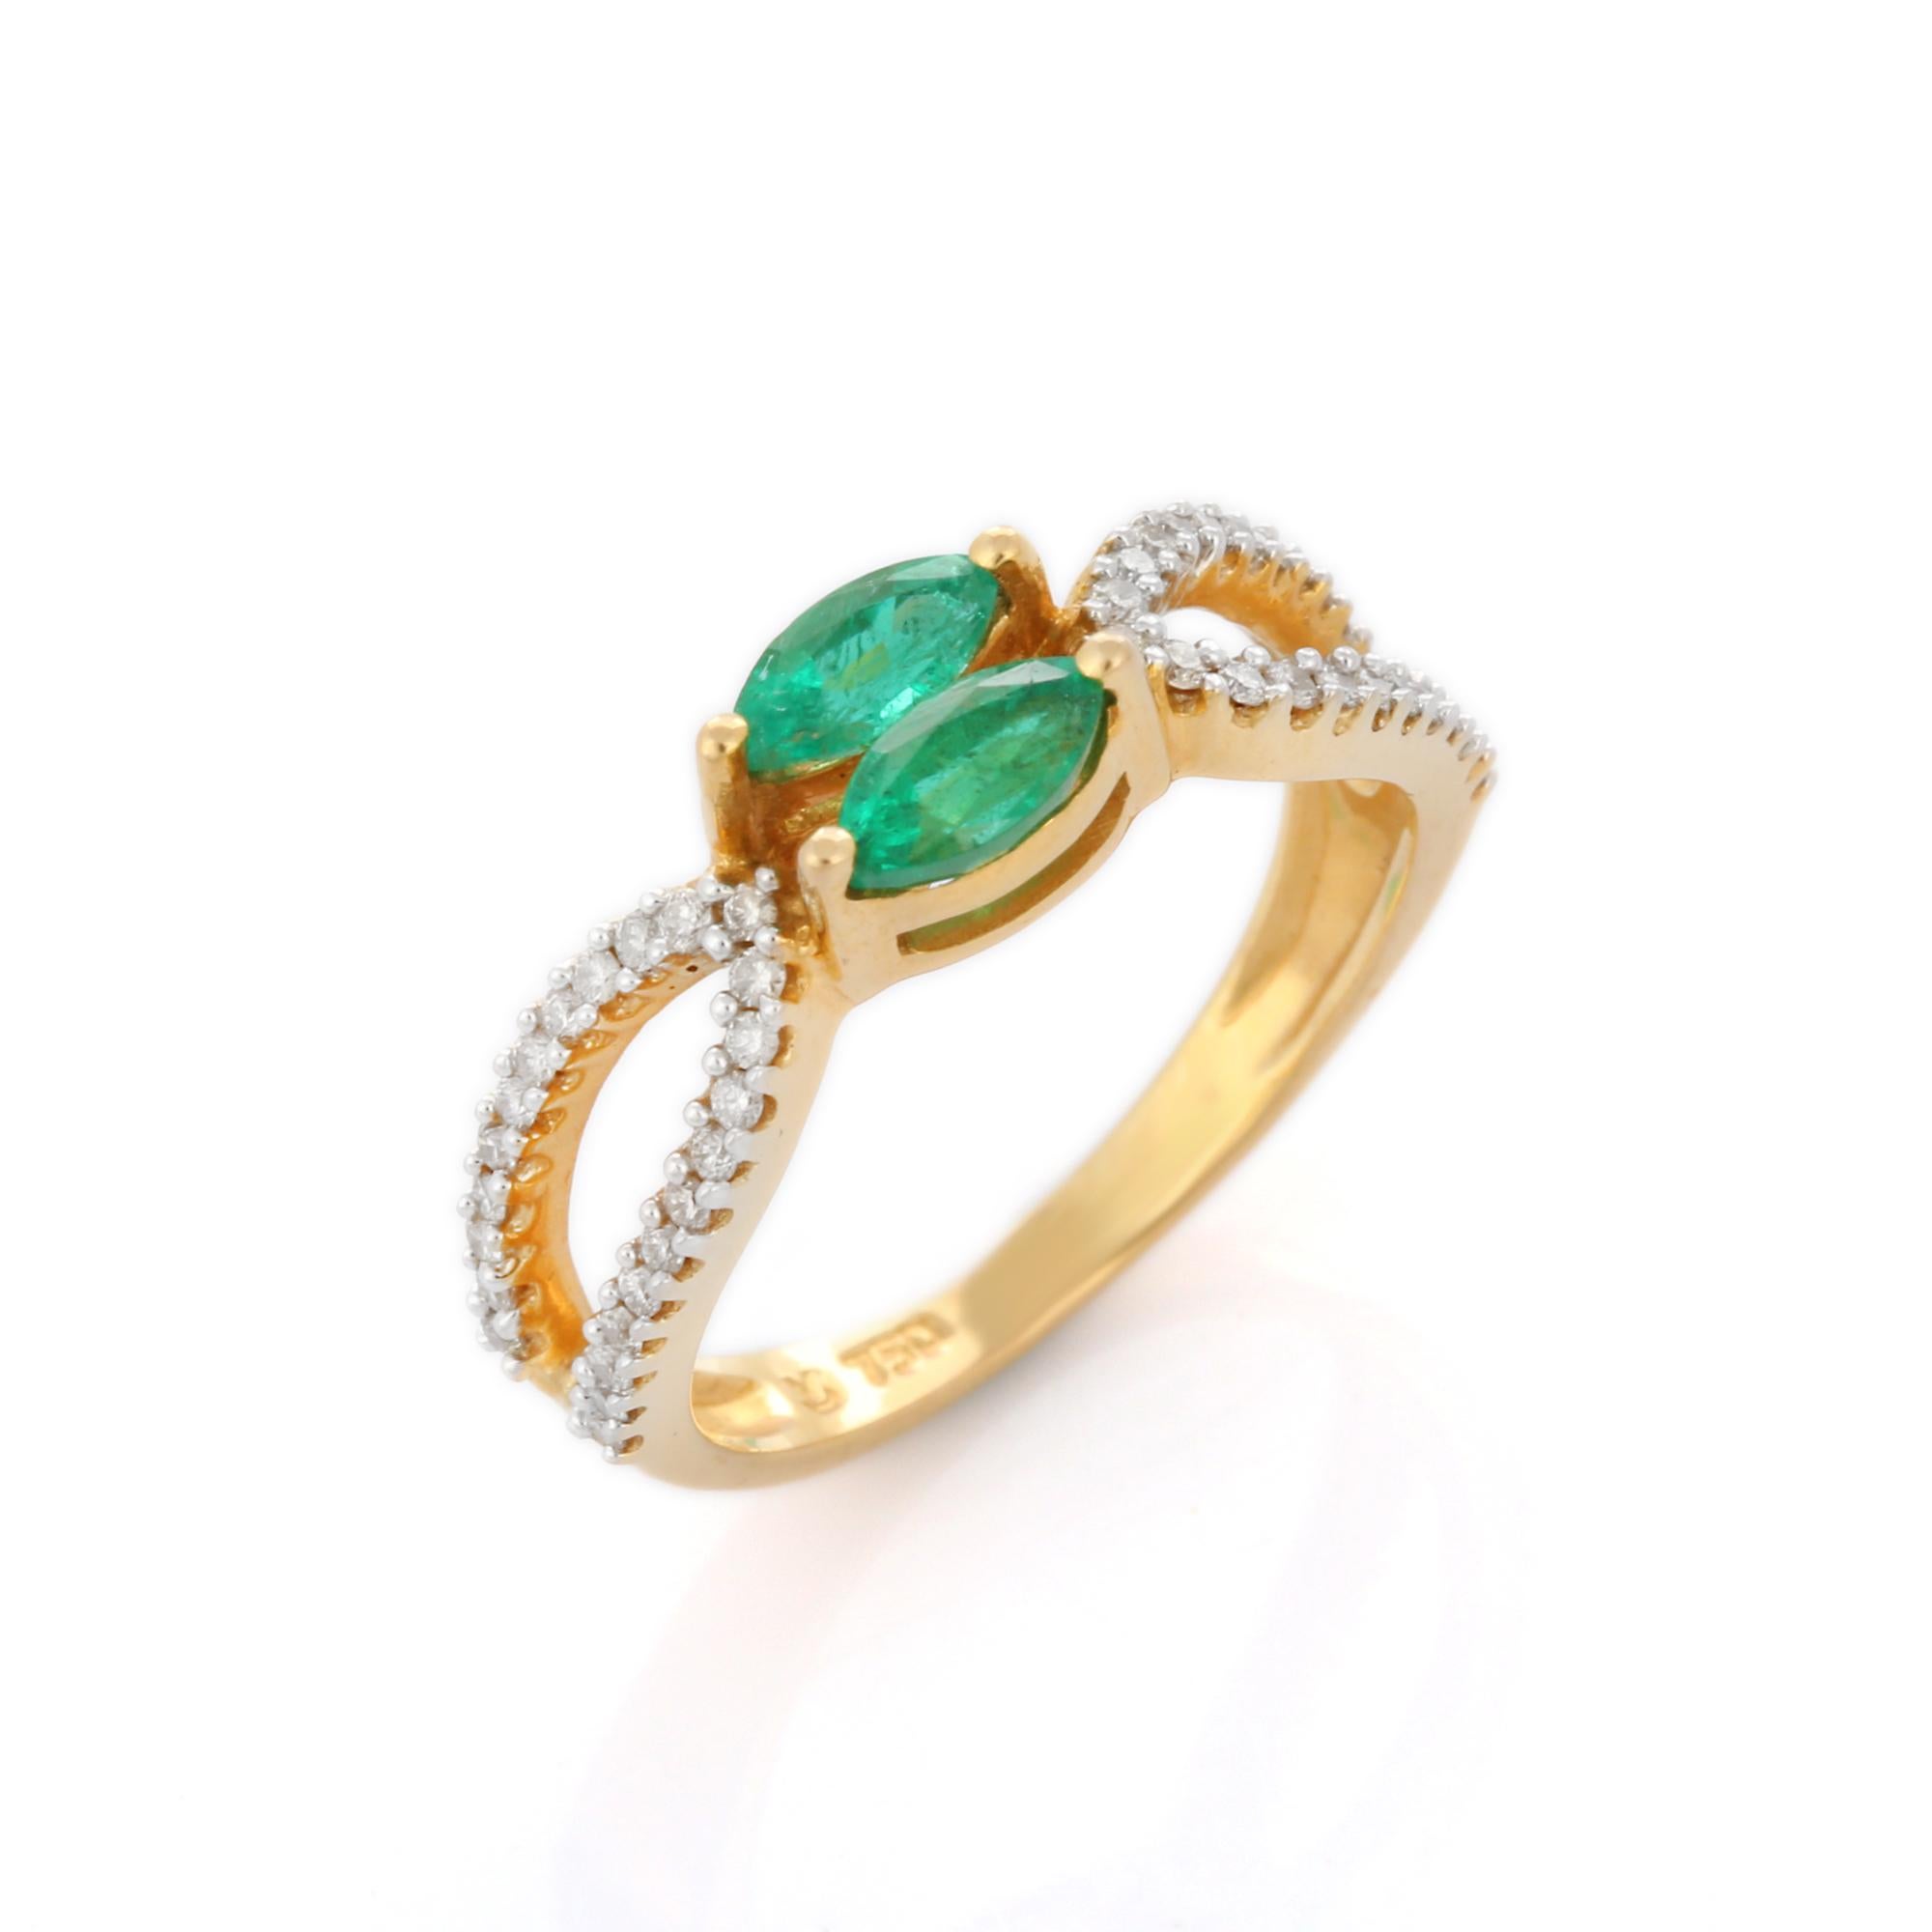 For Sale:  Emerald Ring, Diamond Emerald Wedding Ring in 18K Yellow Gold 2